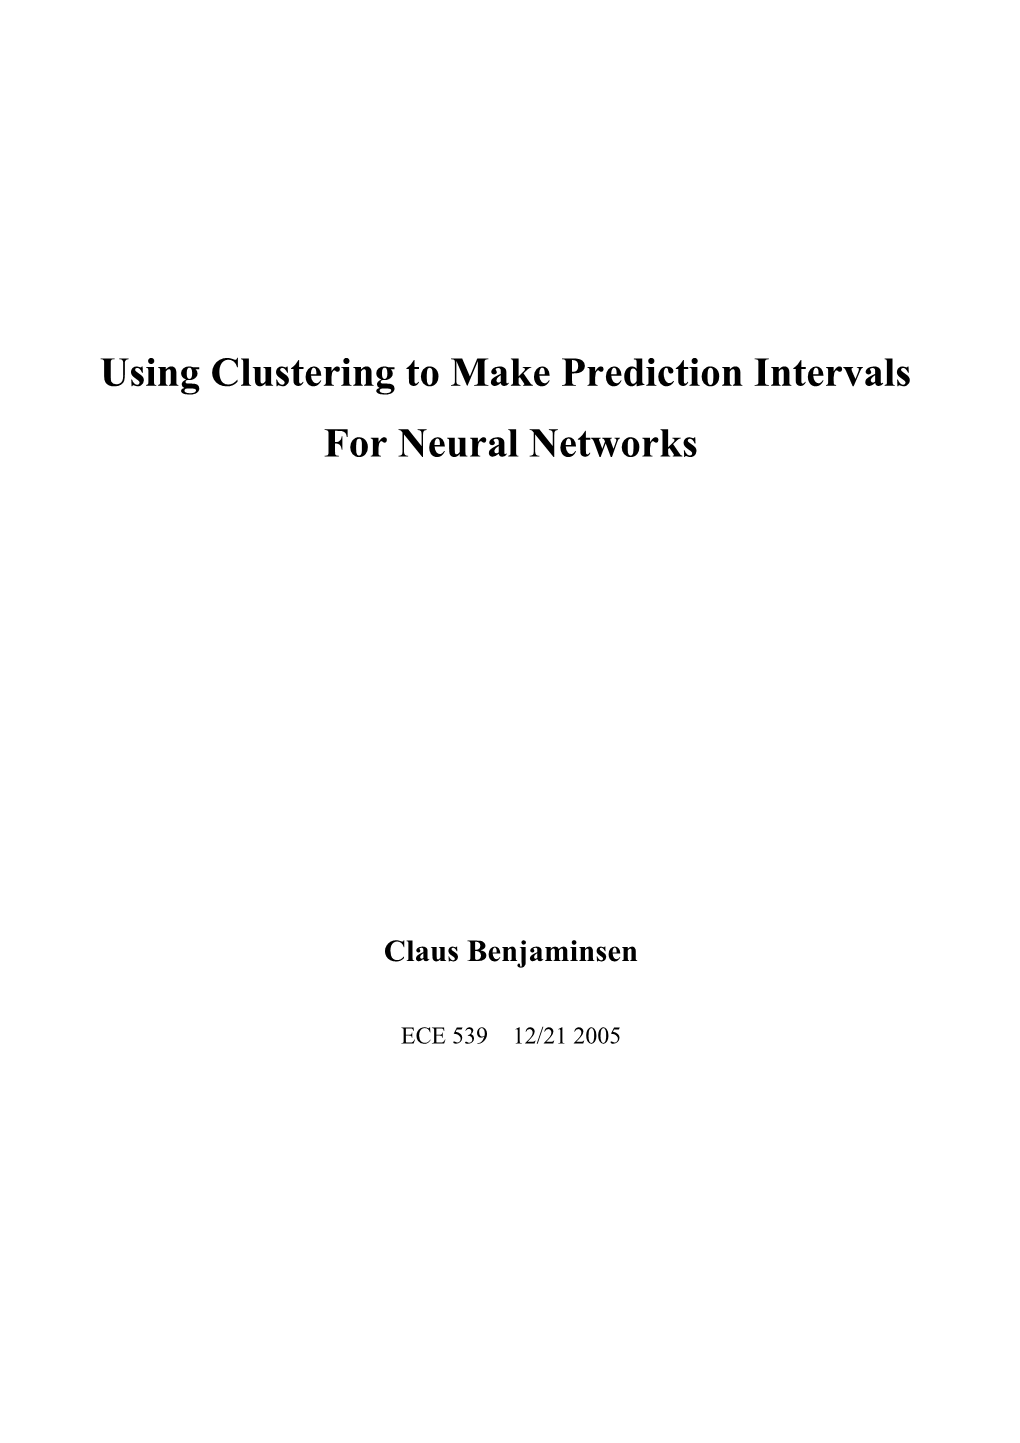 Making Prediction Intervals Using Neural Networks